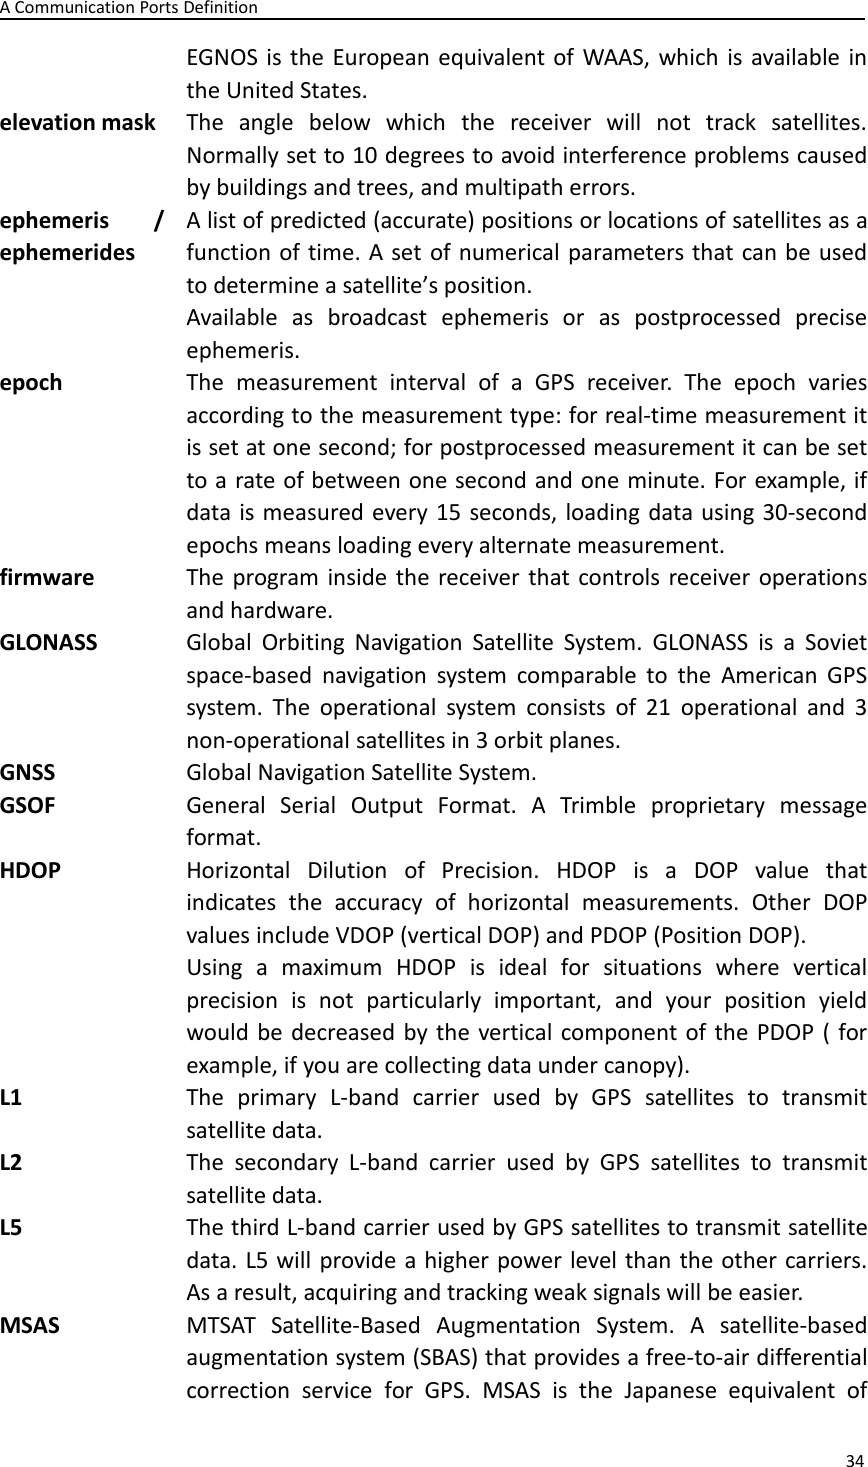 Page 34 of Huace Navigation Technology A02025 Geodetic GNSS Receiver P3DT User Manual 